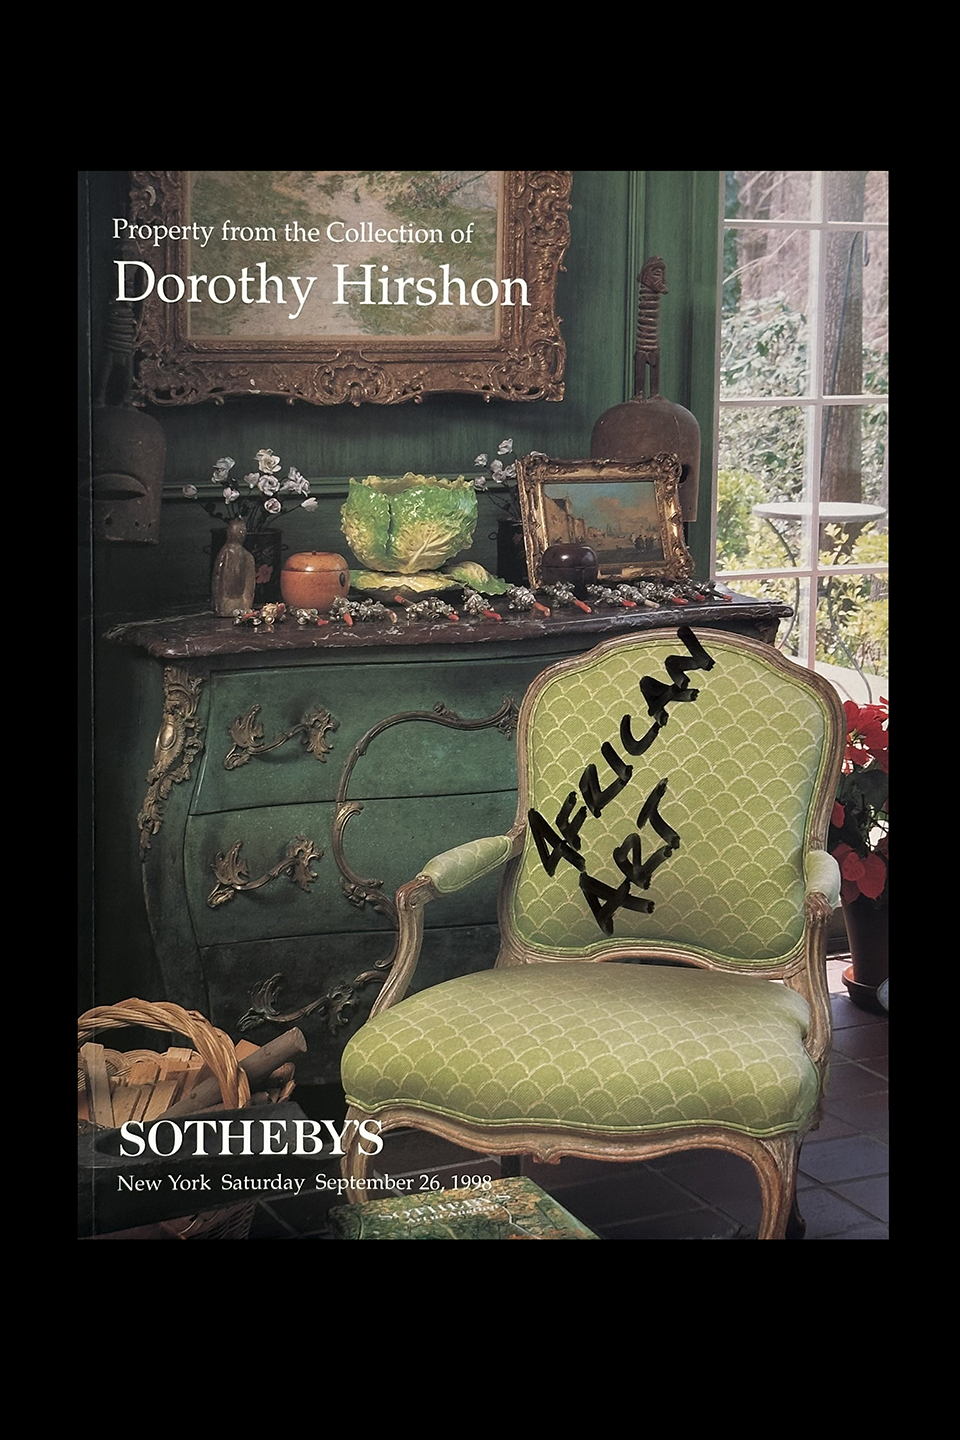 Sotheby's - Property from the Collection of Dorothy Hirshon - New York, May, 1997